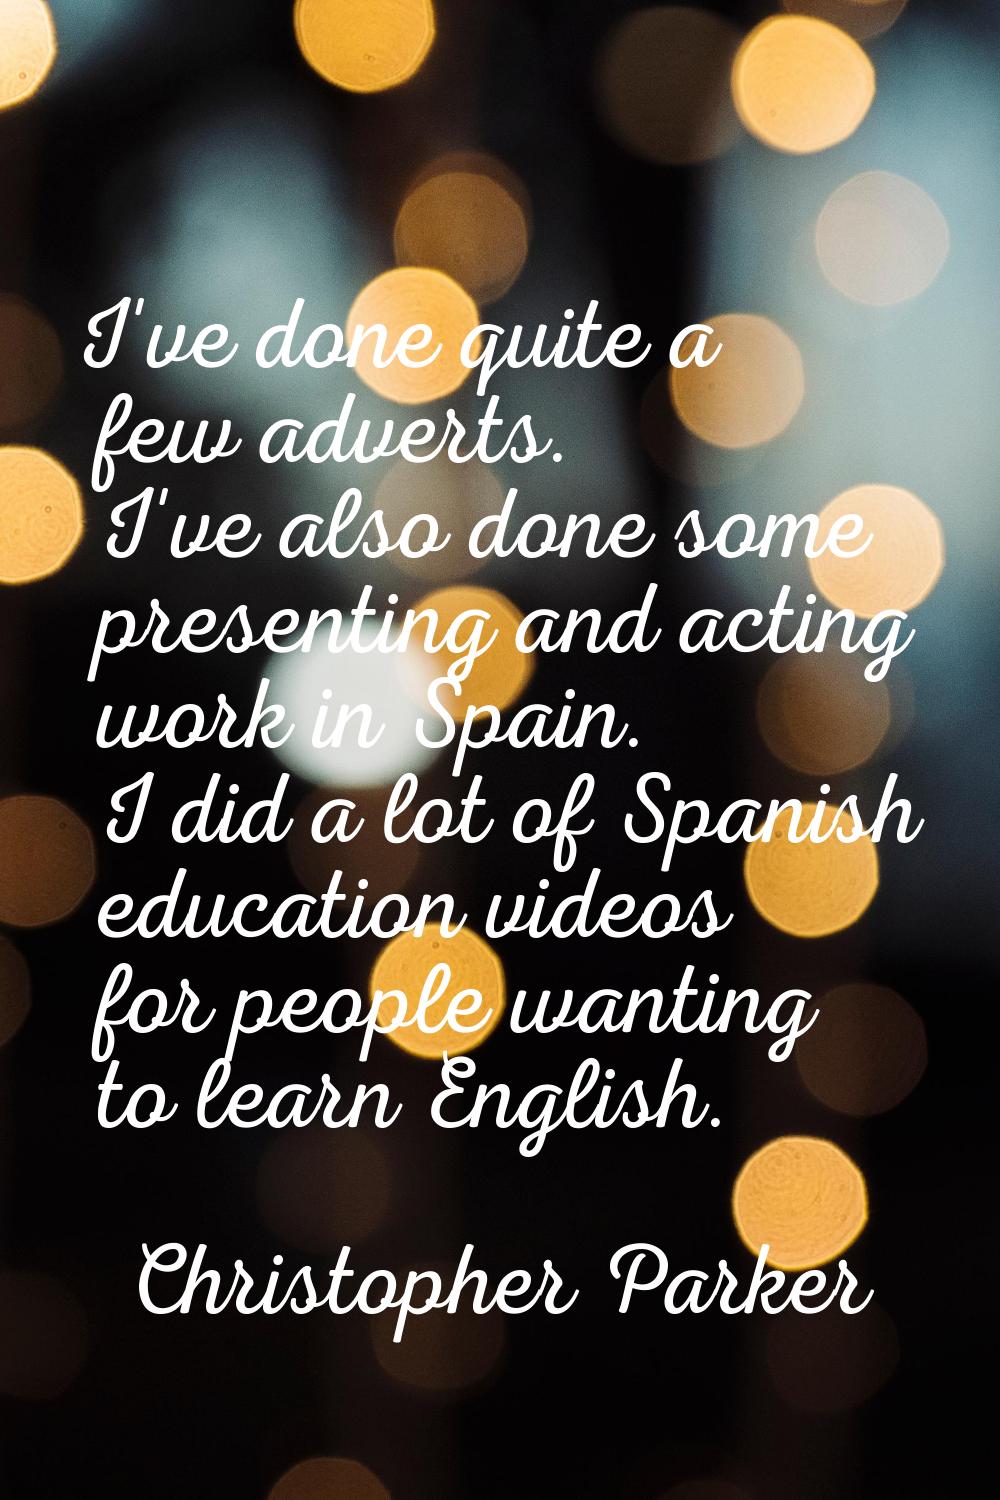 I've done quite a few adverts. I've also done some presenting and acting work in Spain. I did a lot